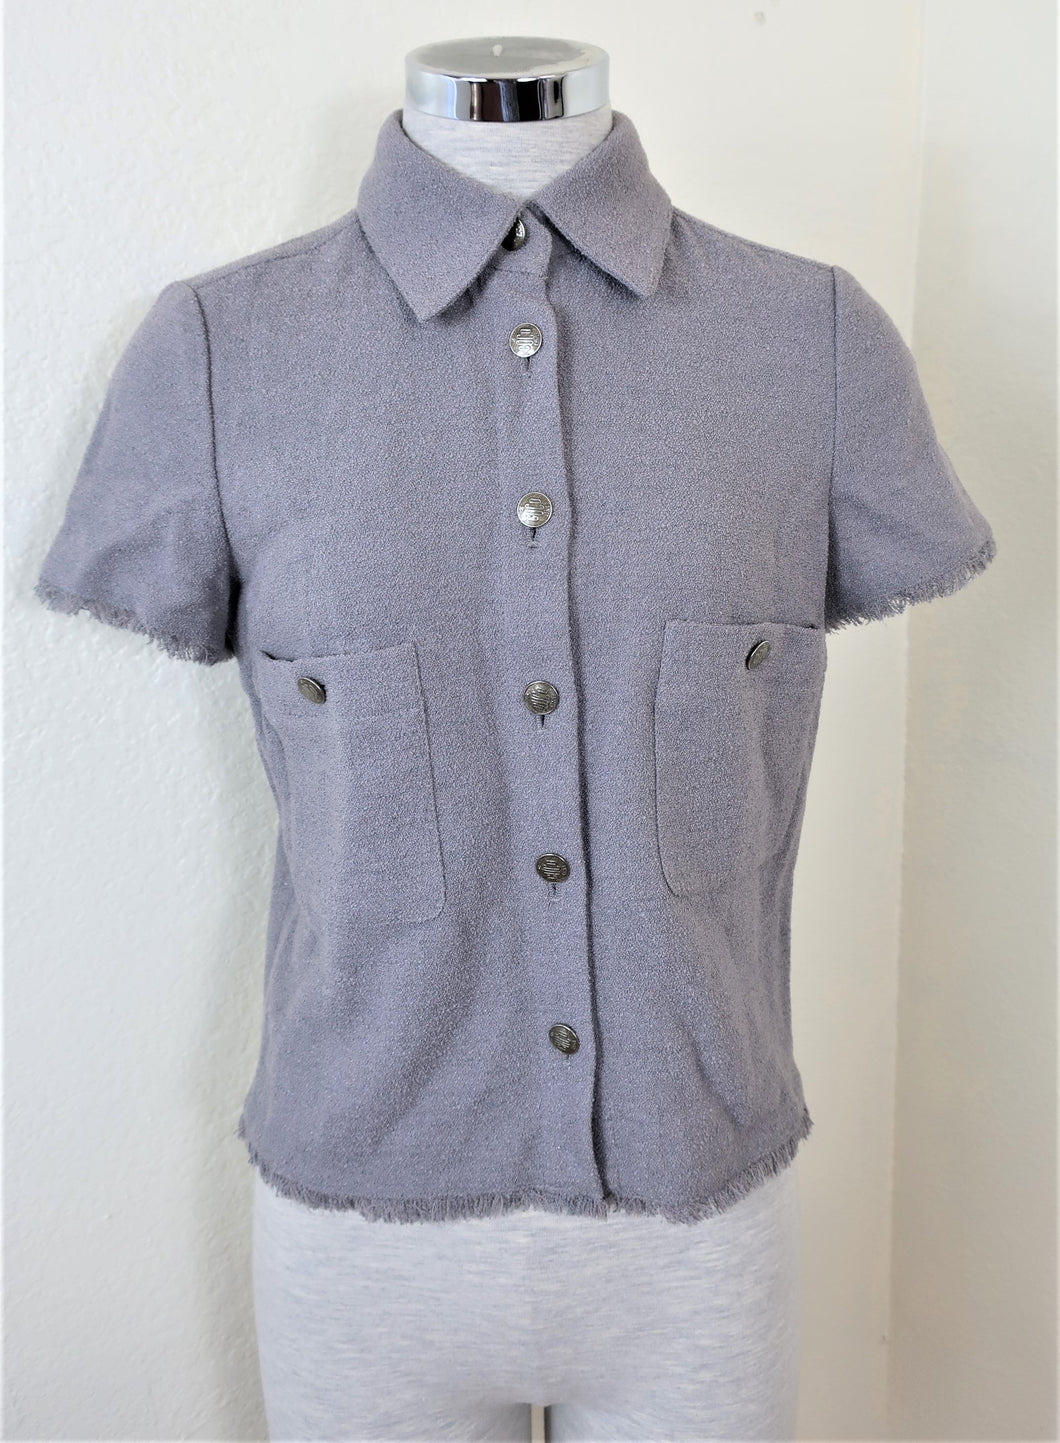 CHANEL Grey Wool Blend COCO Line Jacket Button Top Blouse Short Sleeve Small 36 4 5 6